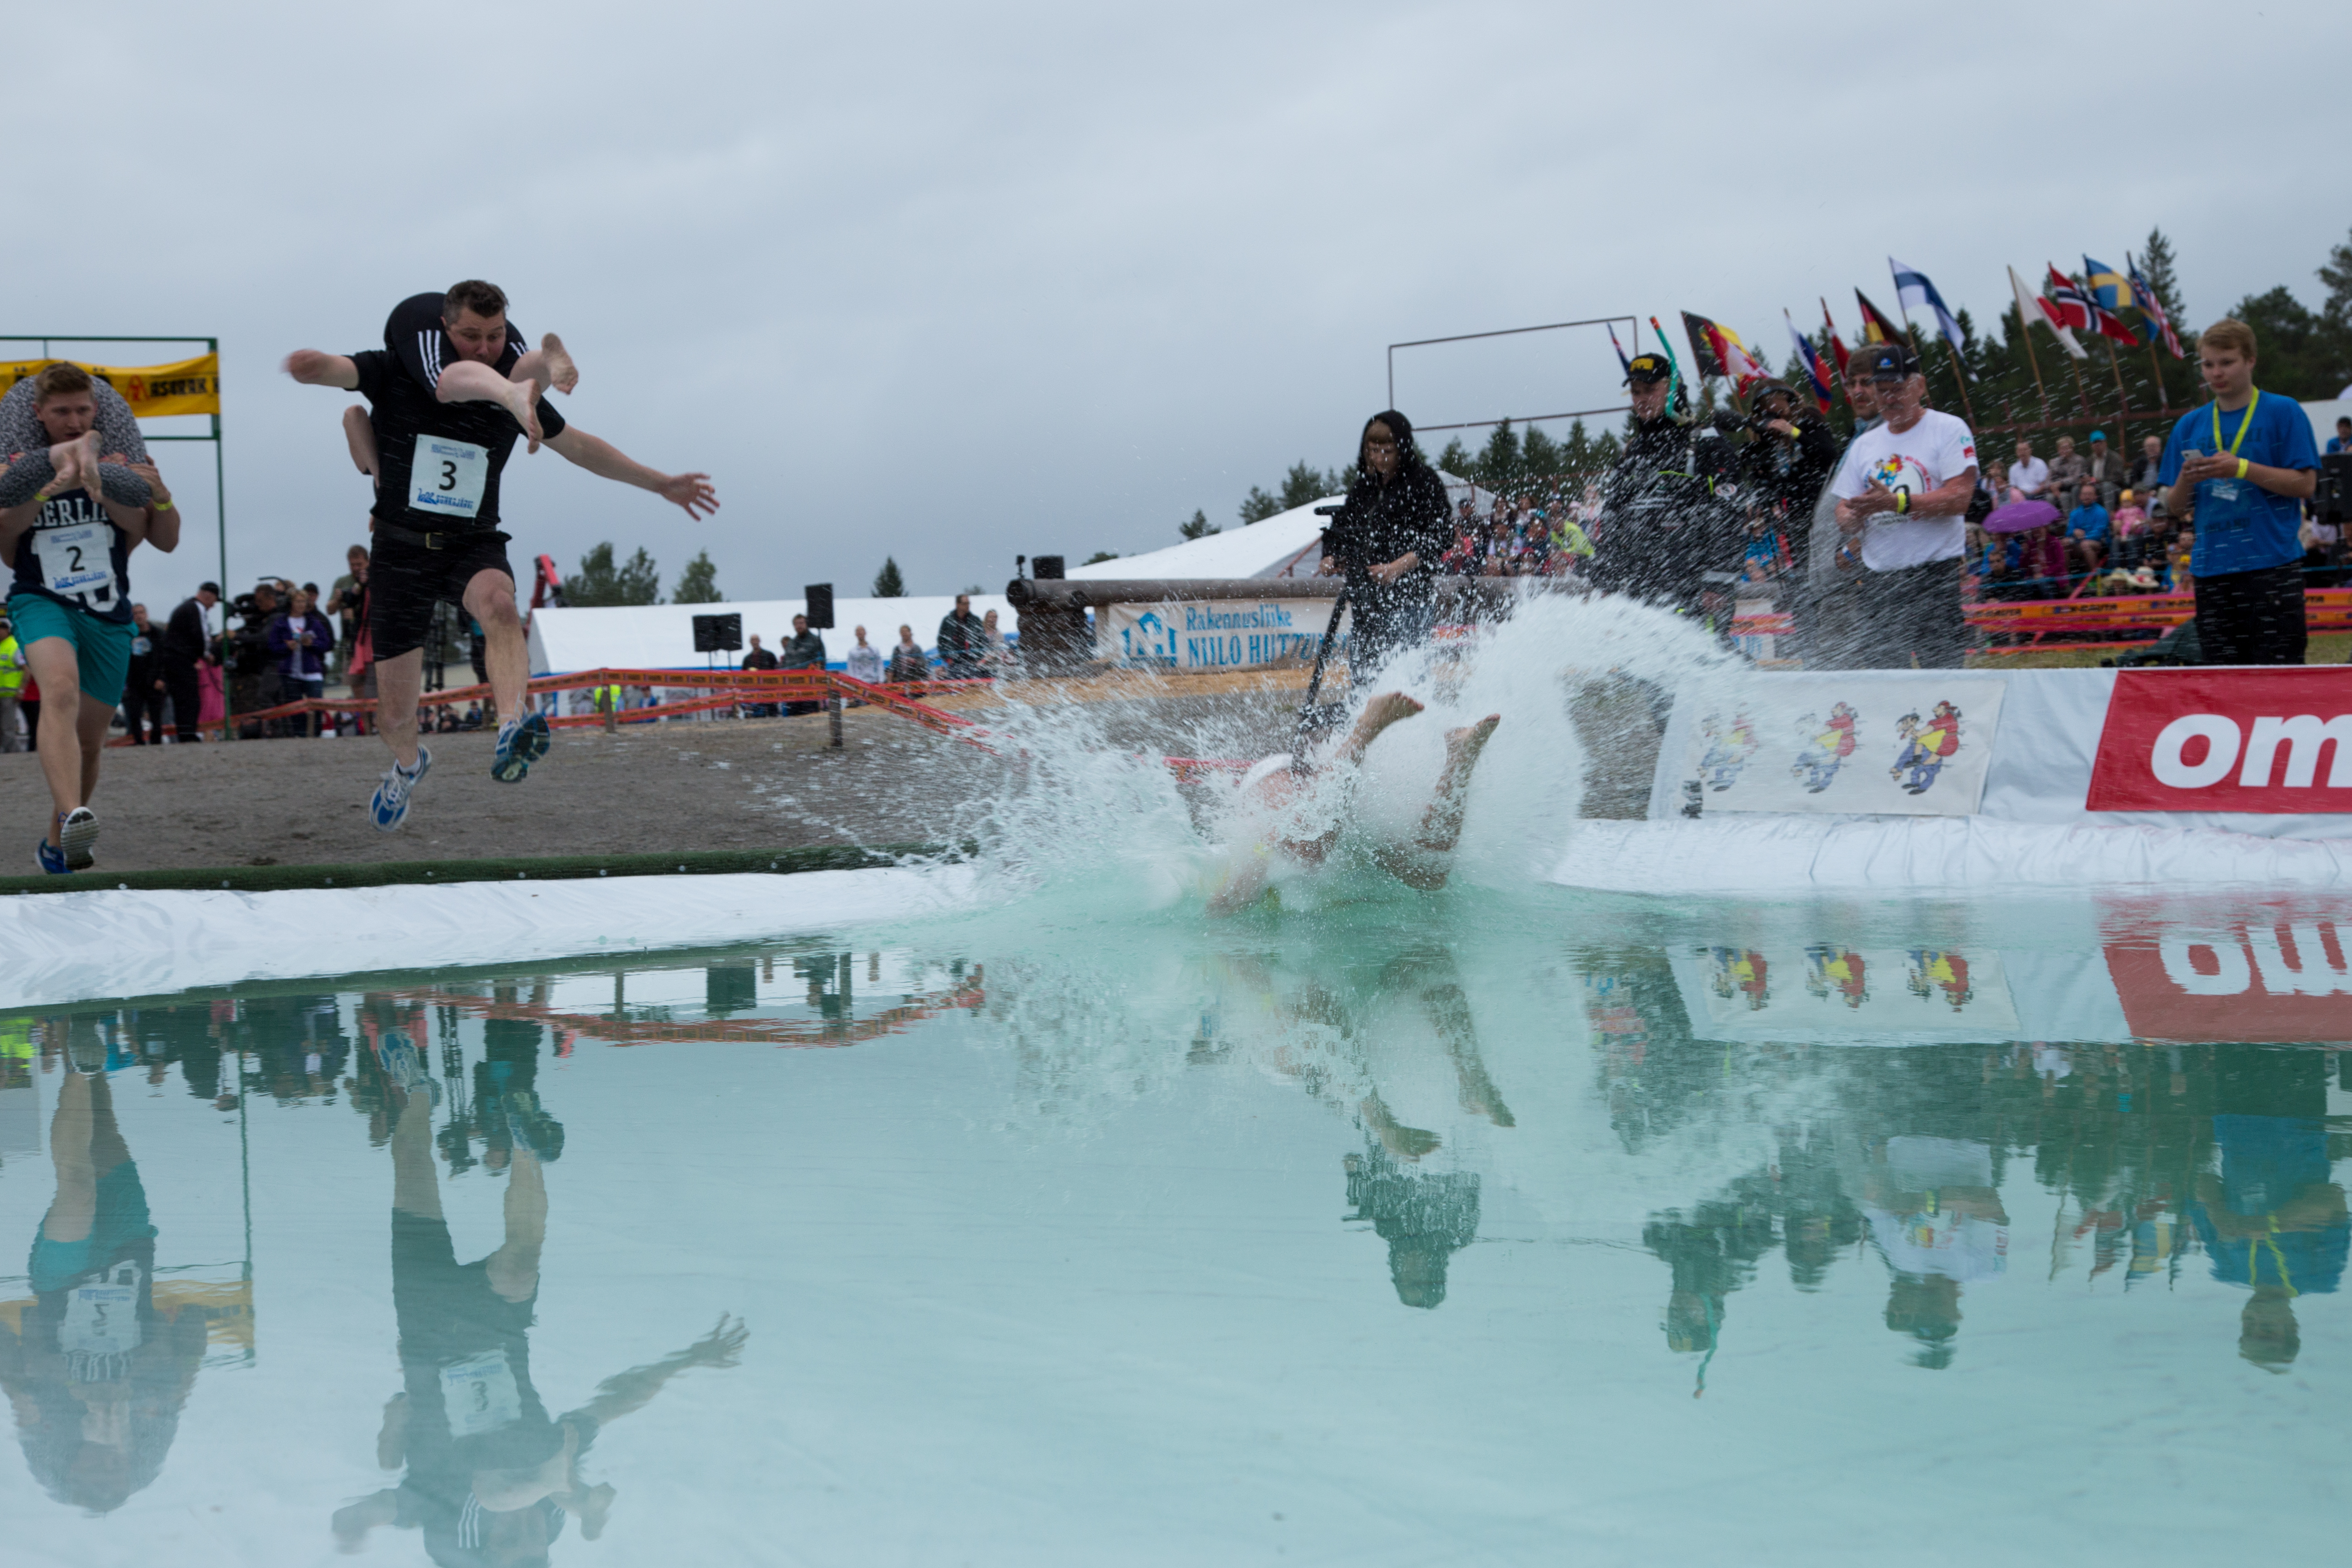 Competitors in the world wife carrying championship